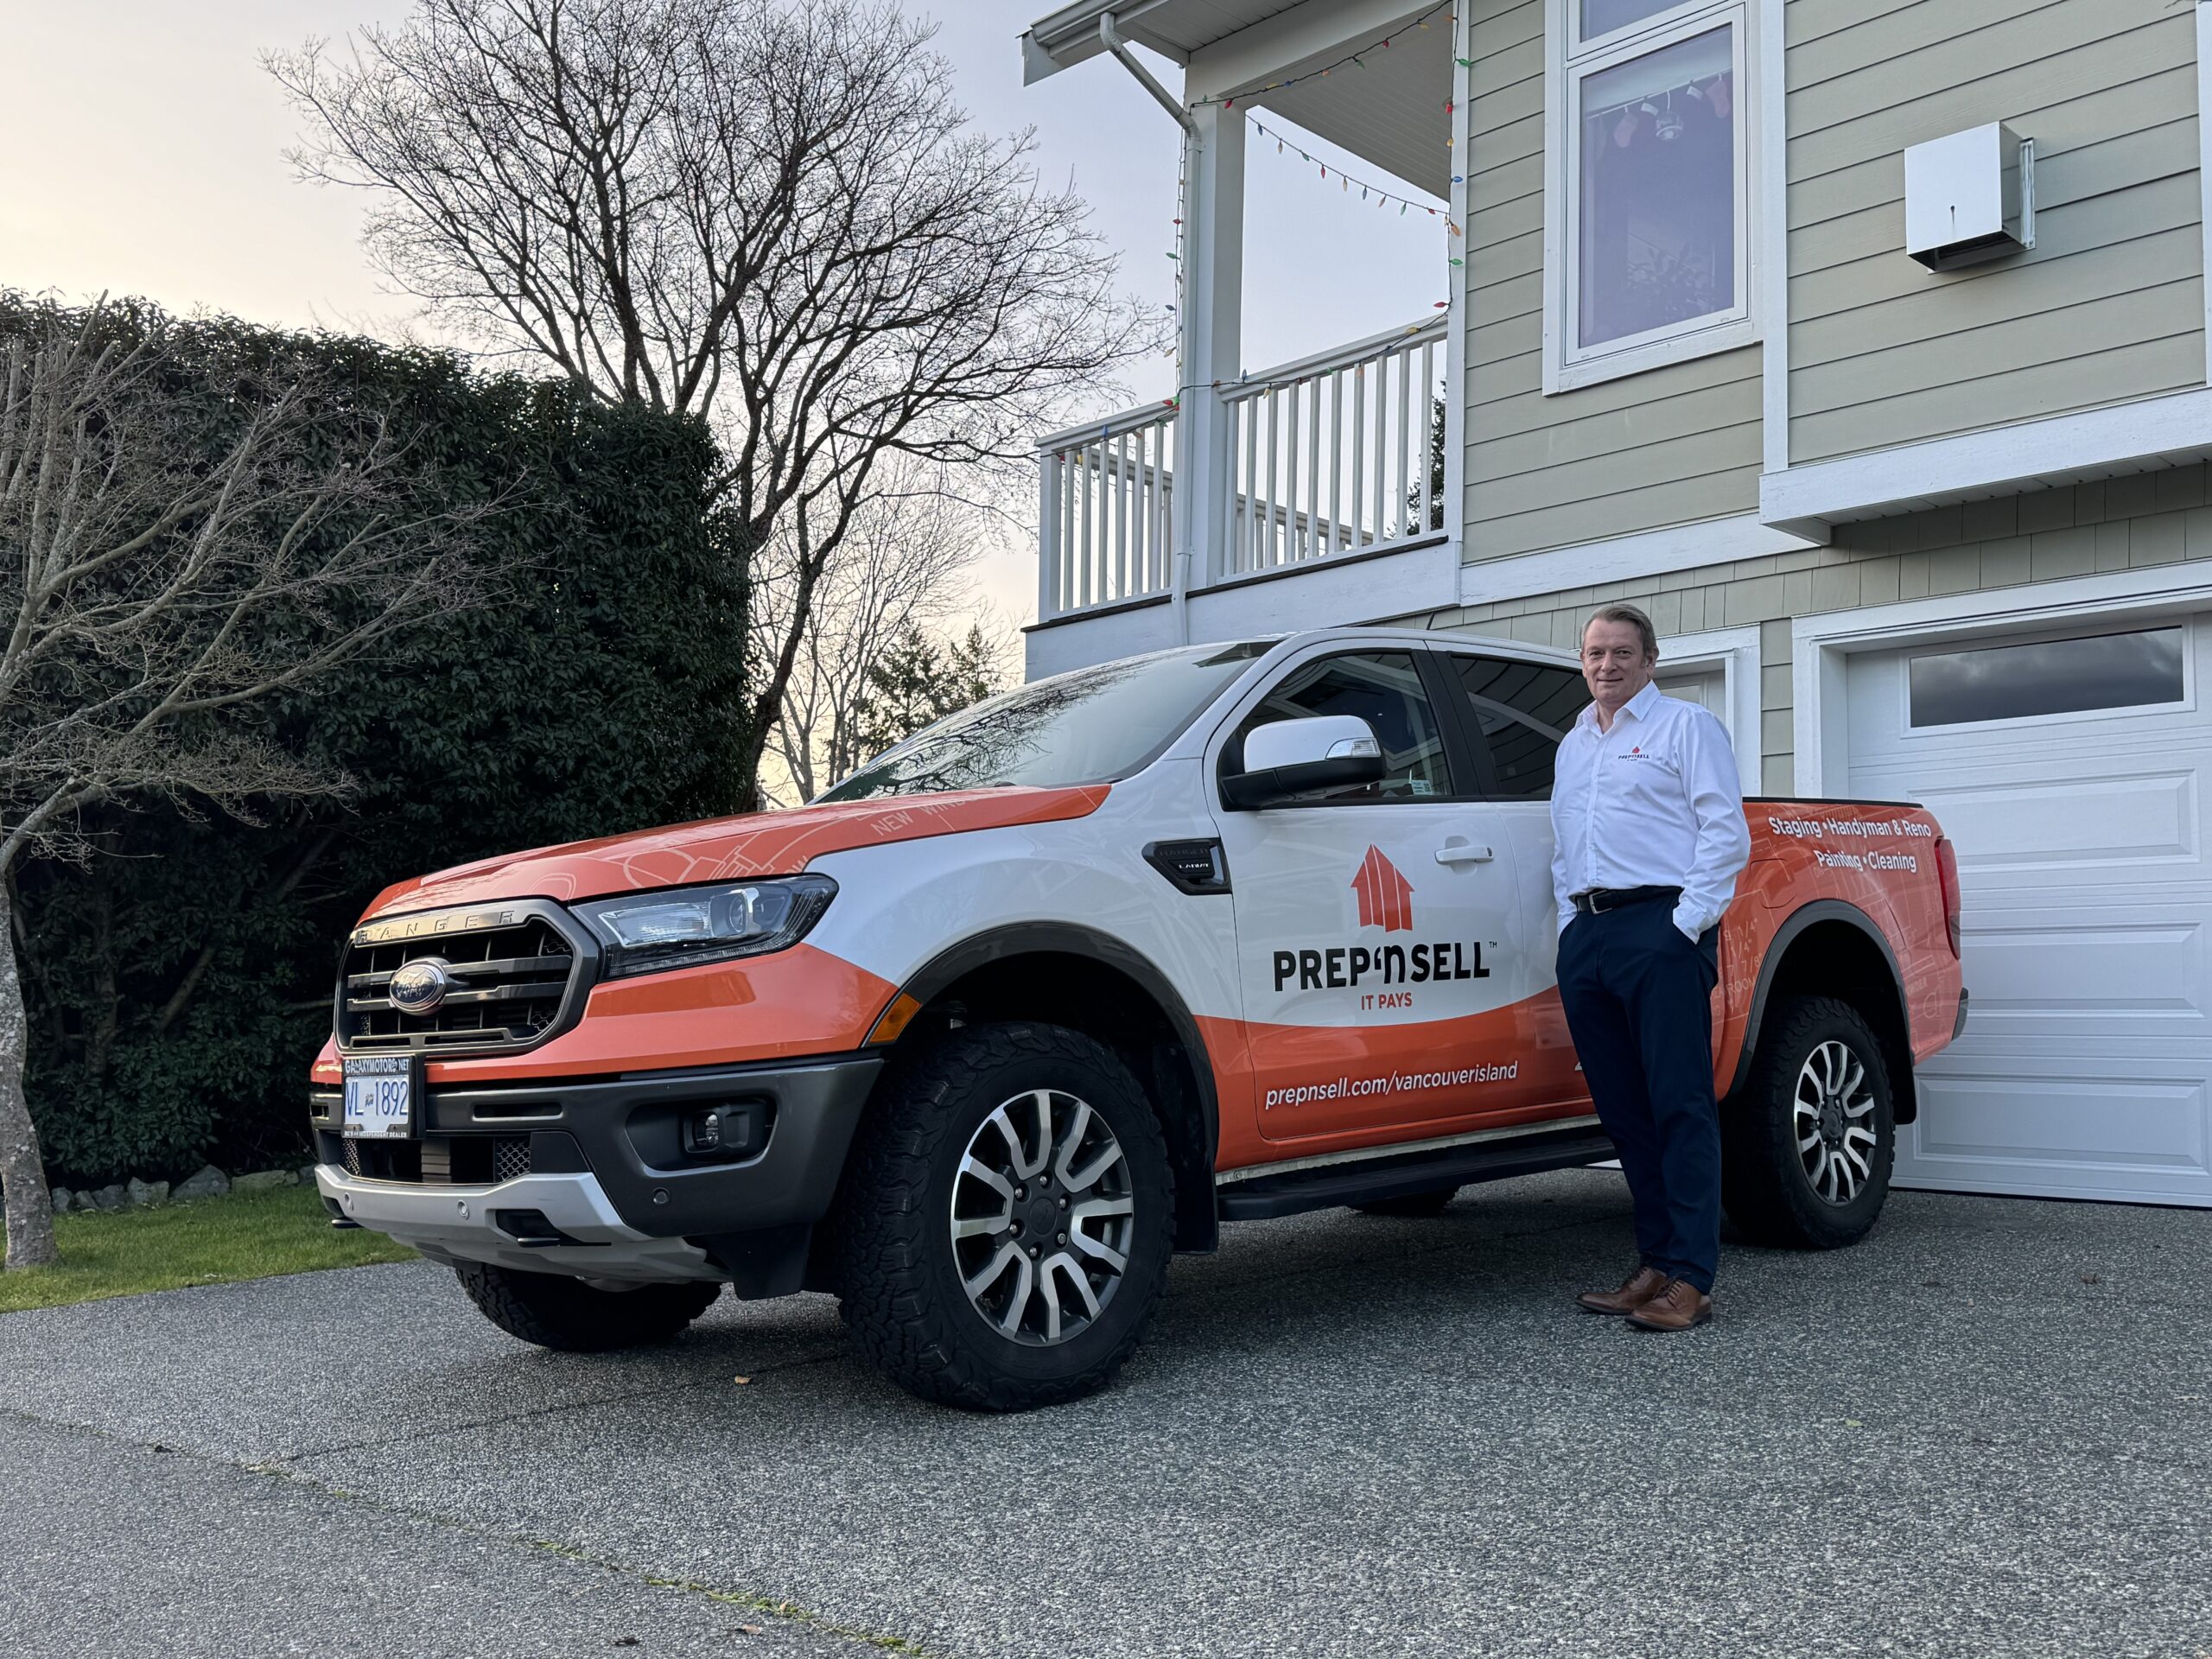 New Prep'n Sell Vancouver Island franchise truck in front of a freshly staged home ready for sale